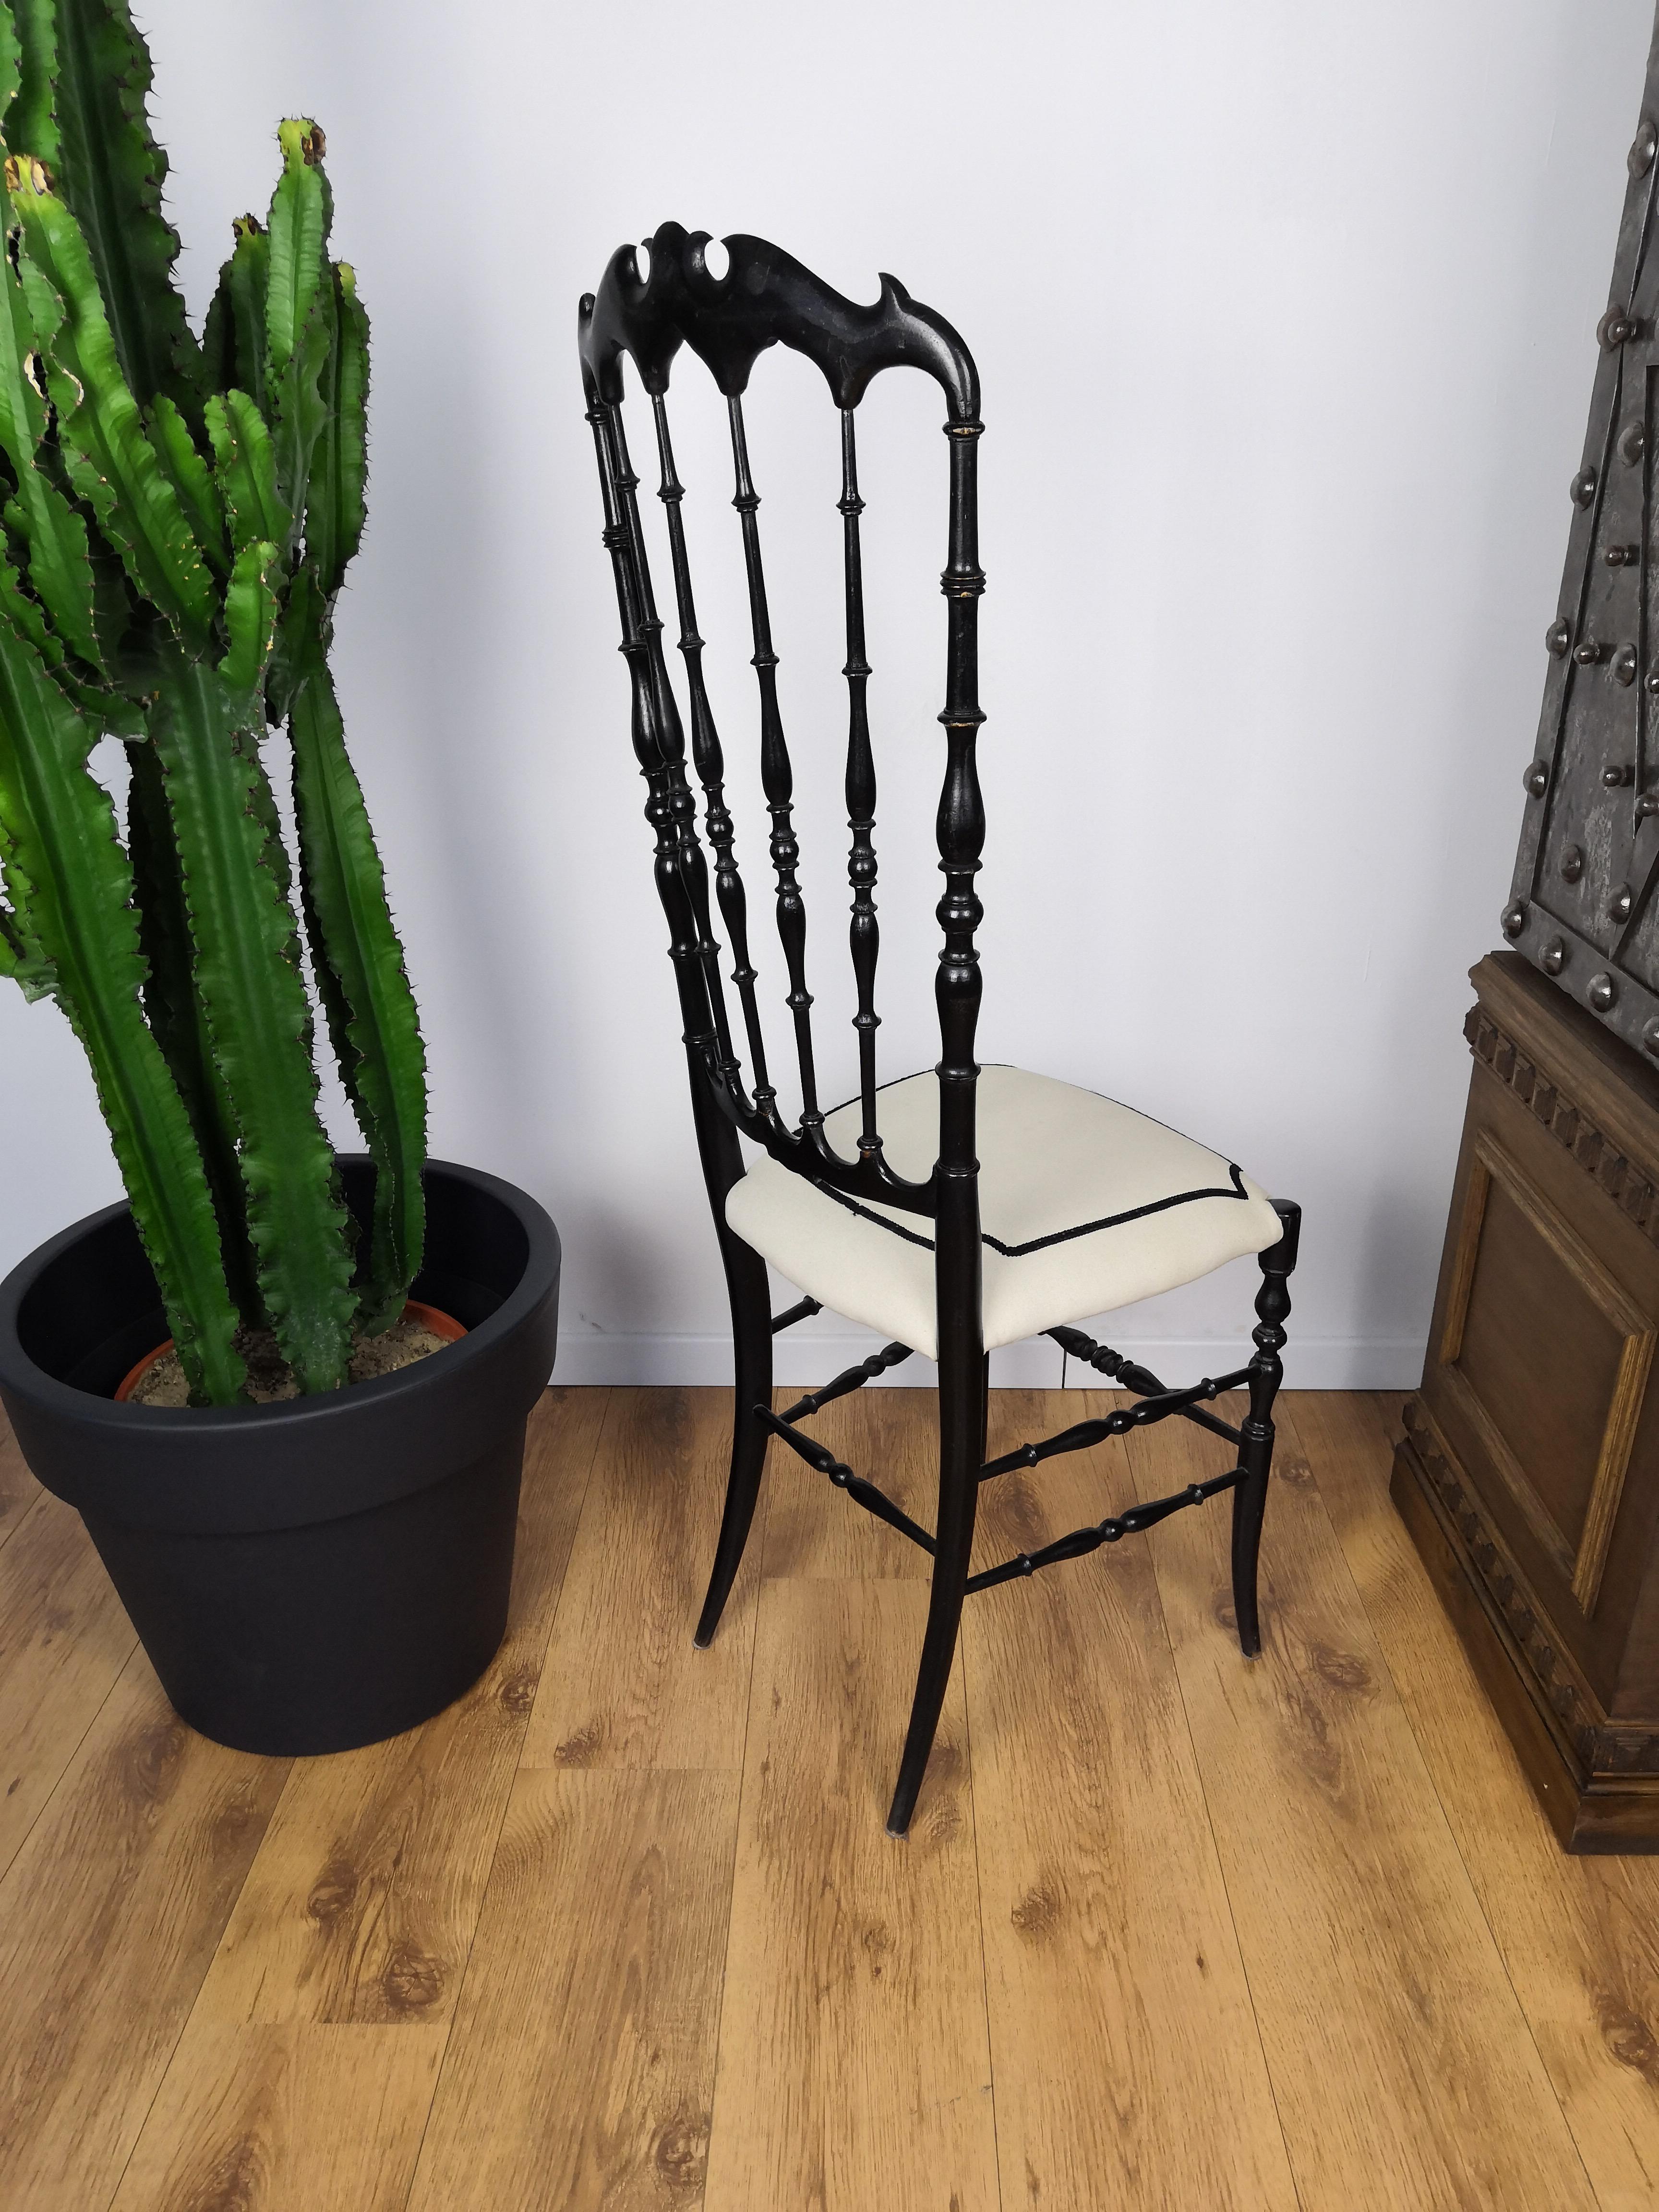 1970s Italian Carved Wood Black Chiavari Chair in Contemporary Modern Upholstery (Hollywood Regency)